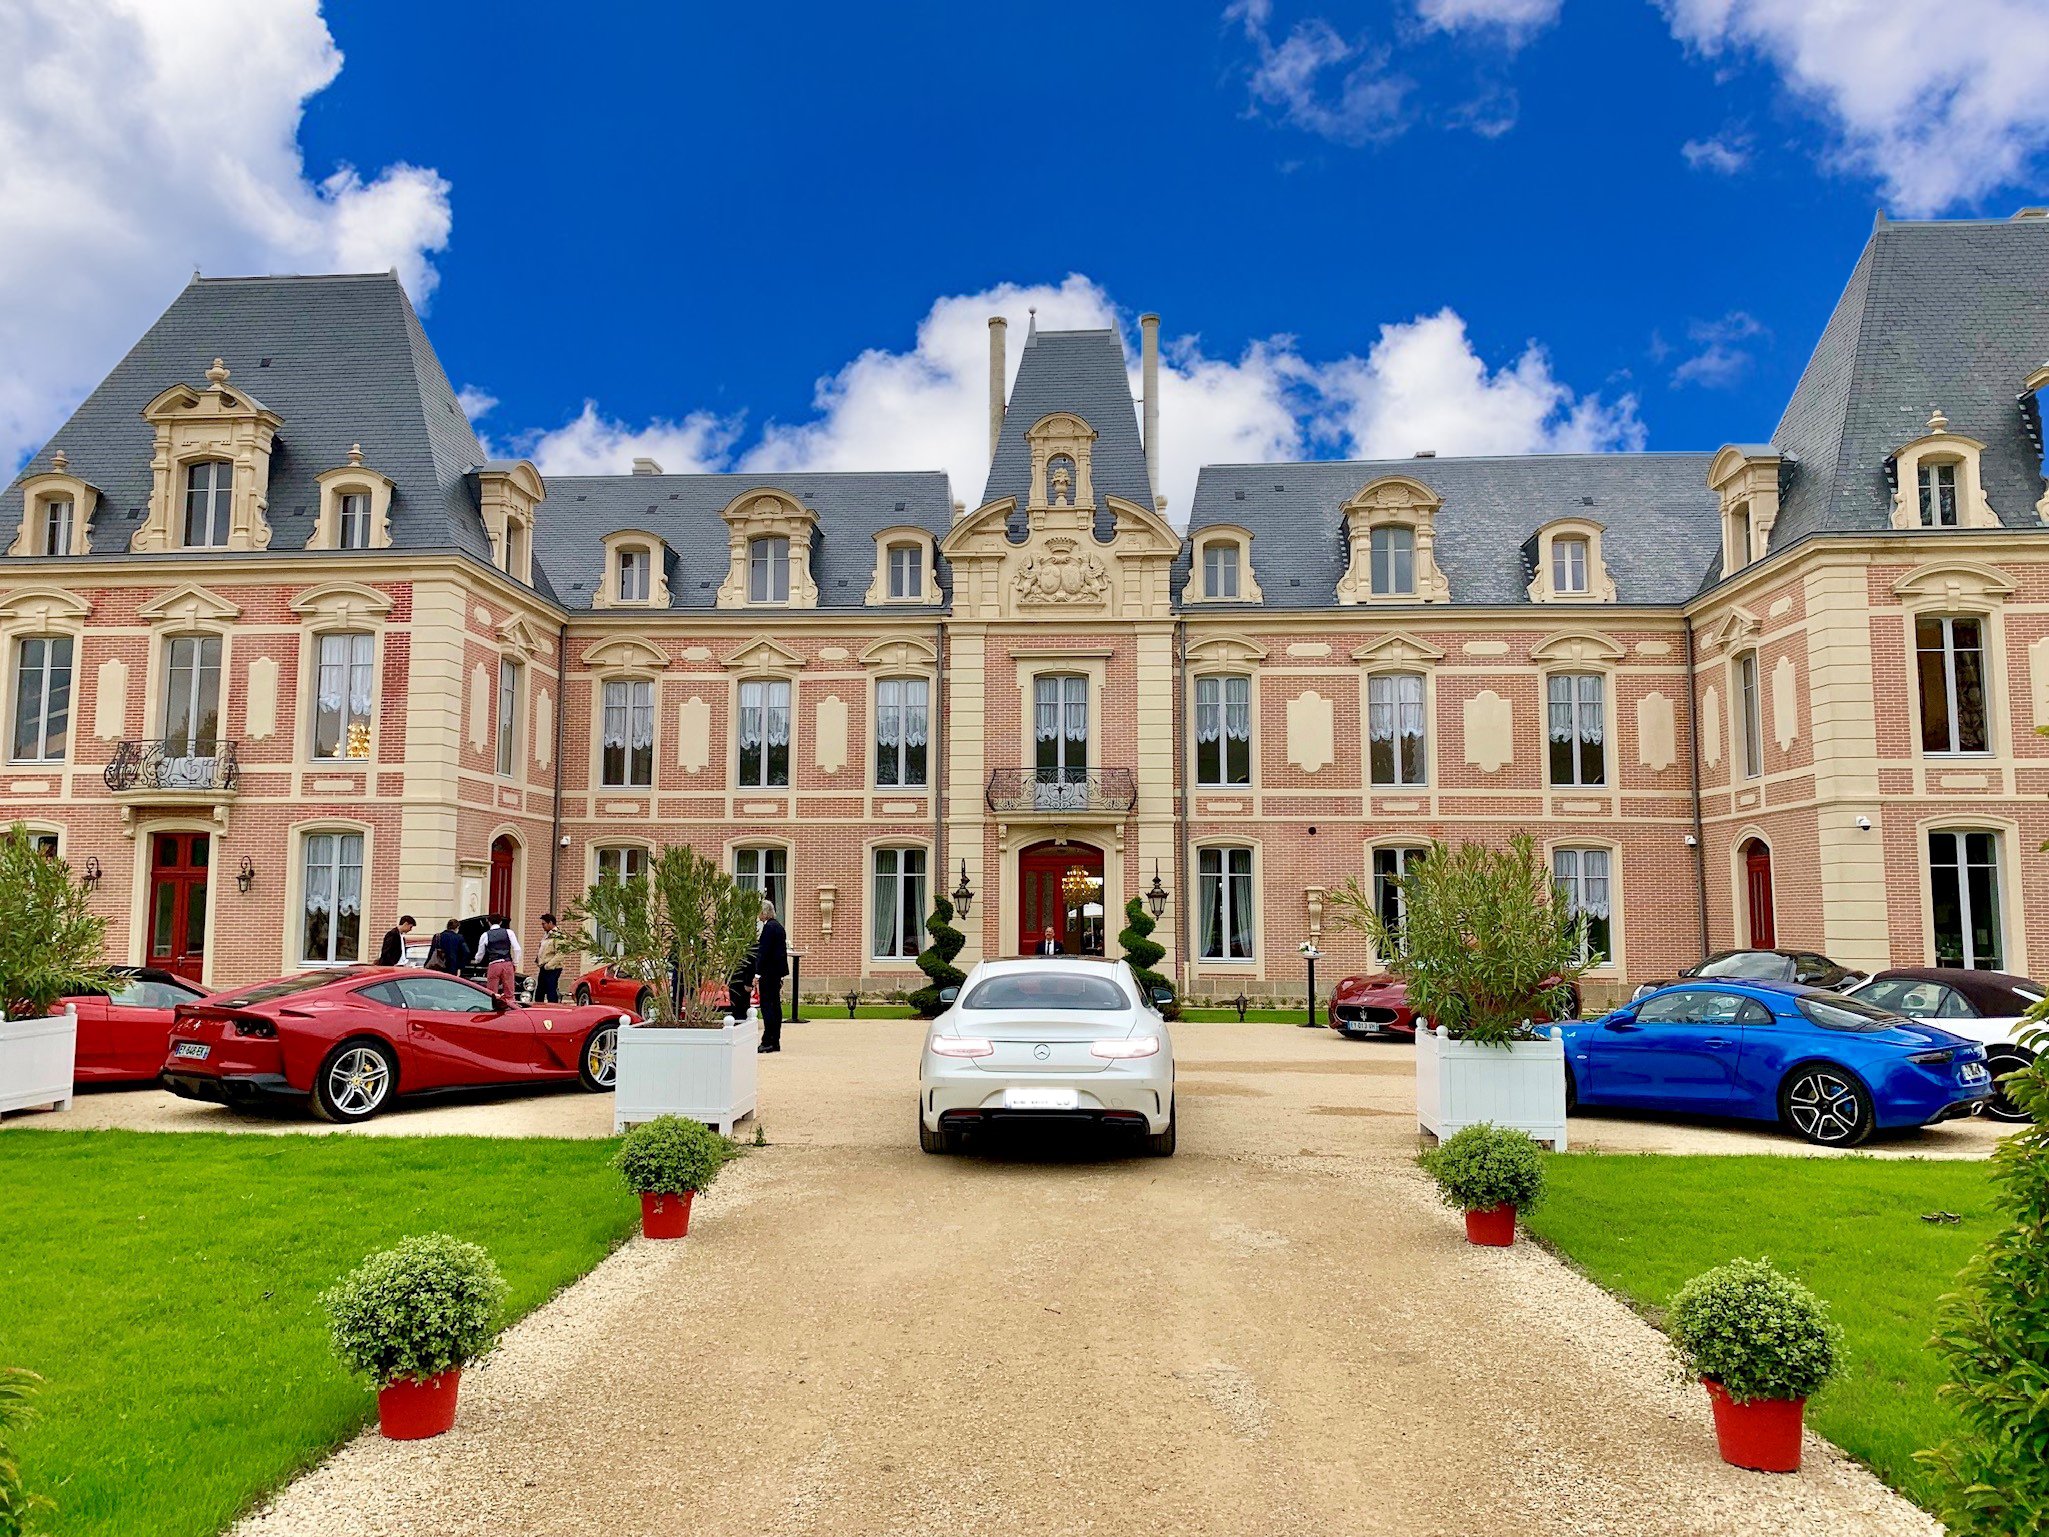 Alexandra Palace | 5 star Hotel, gourmet restaurant, golf course | In Nouvelle Aquitaine, 30 minutes from Niort, France